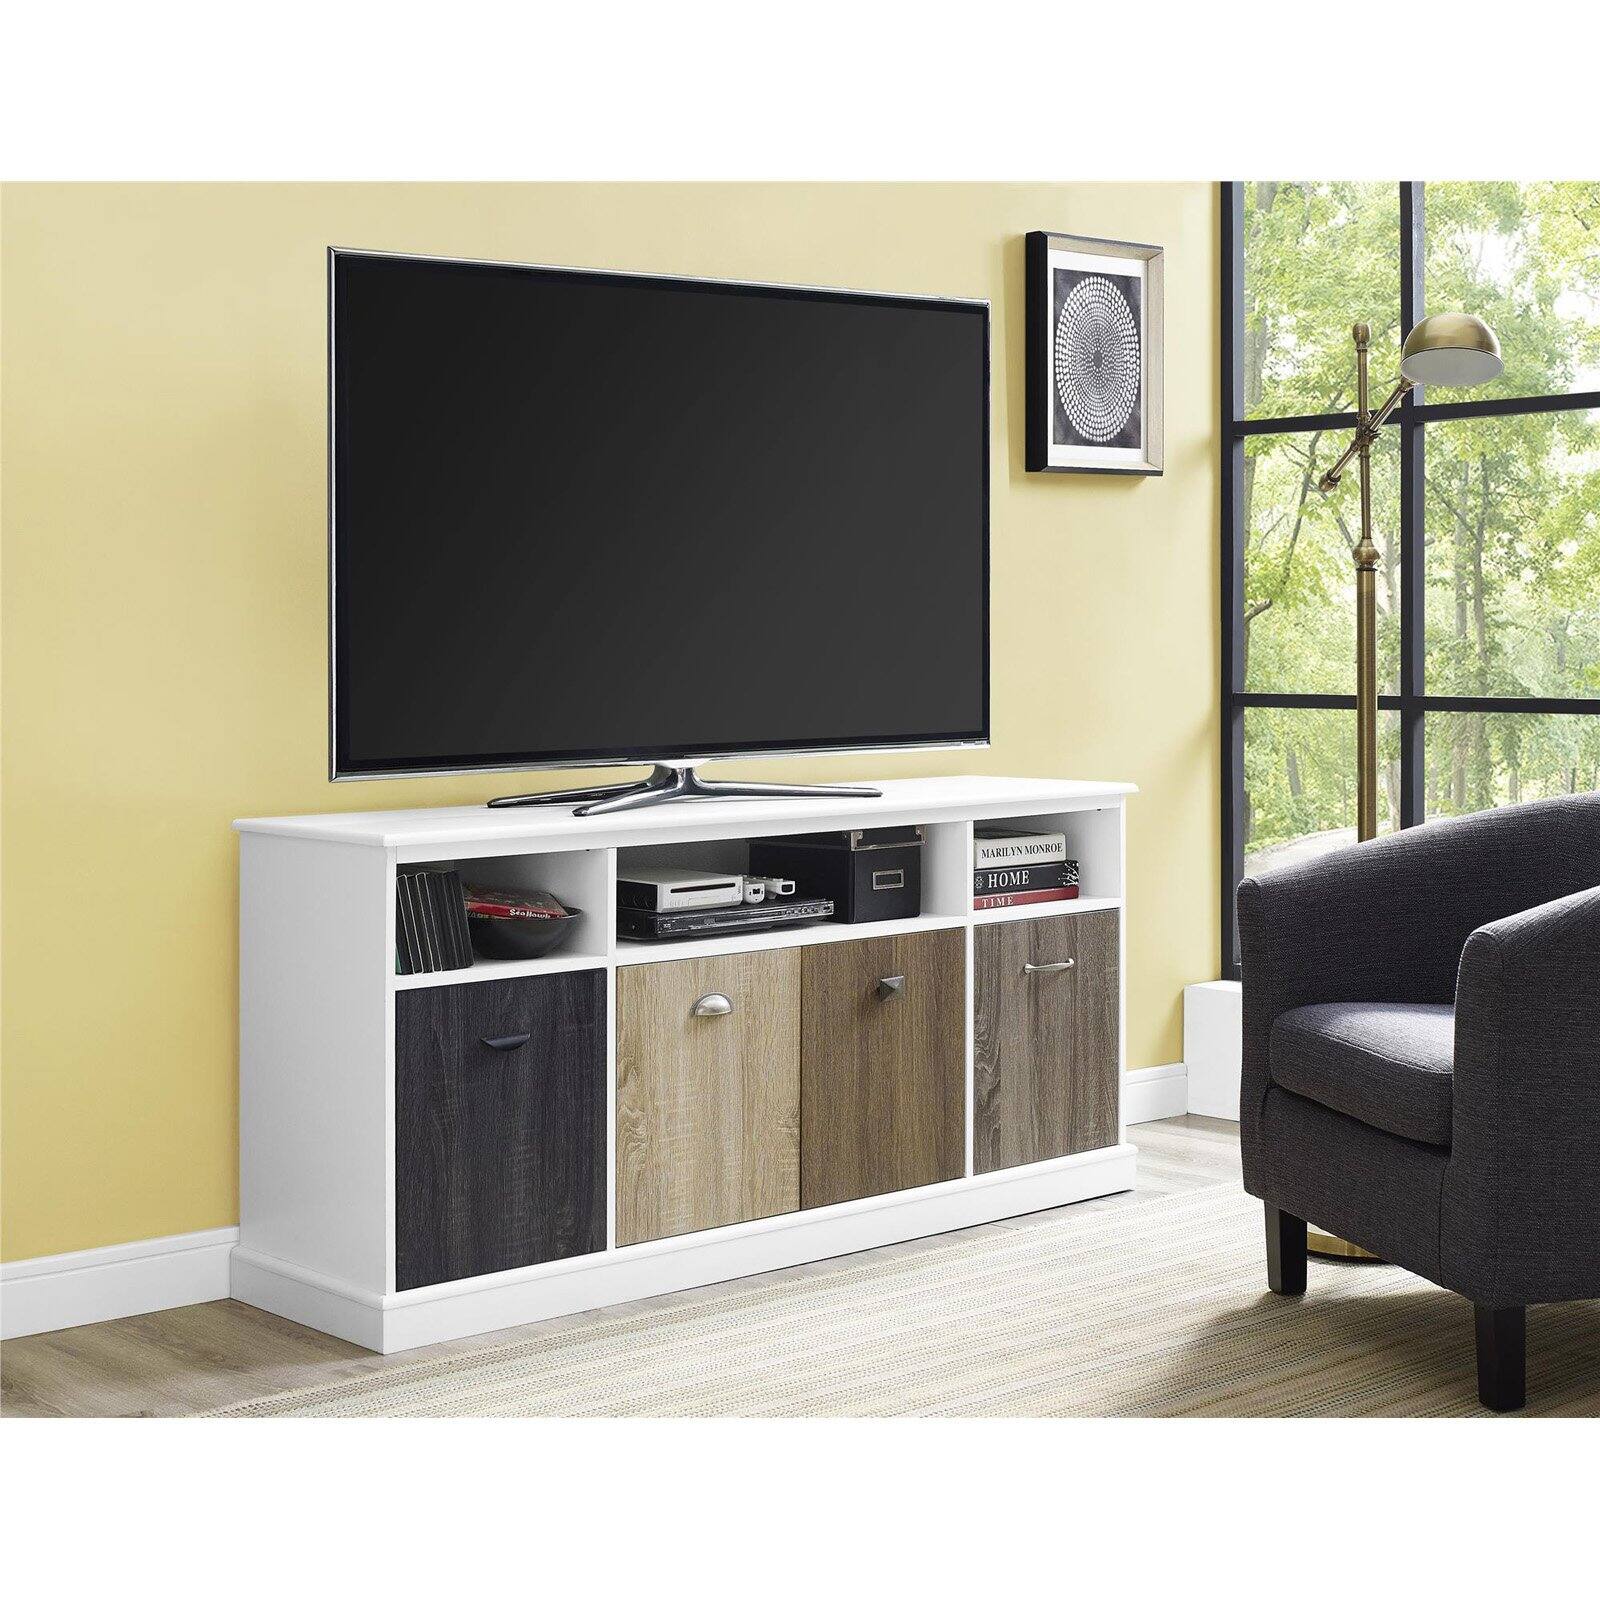 Ameriwood Home Mercer 60" TV Console with Multicolored Door Fronts, Multiple Colors - Black - image 4 of 5